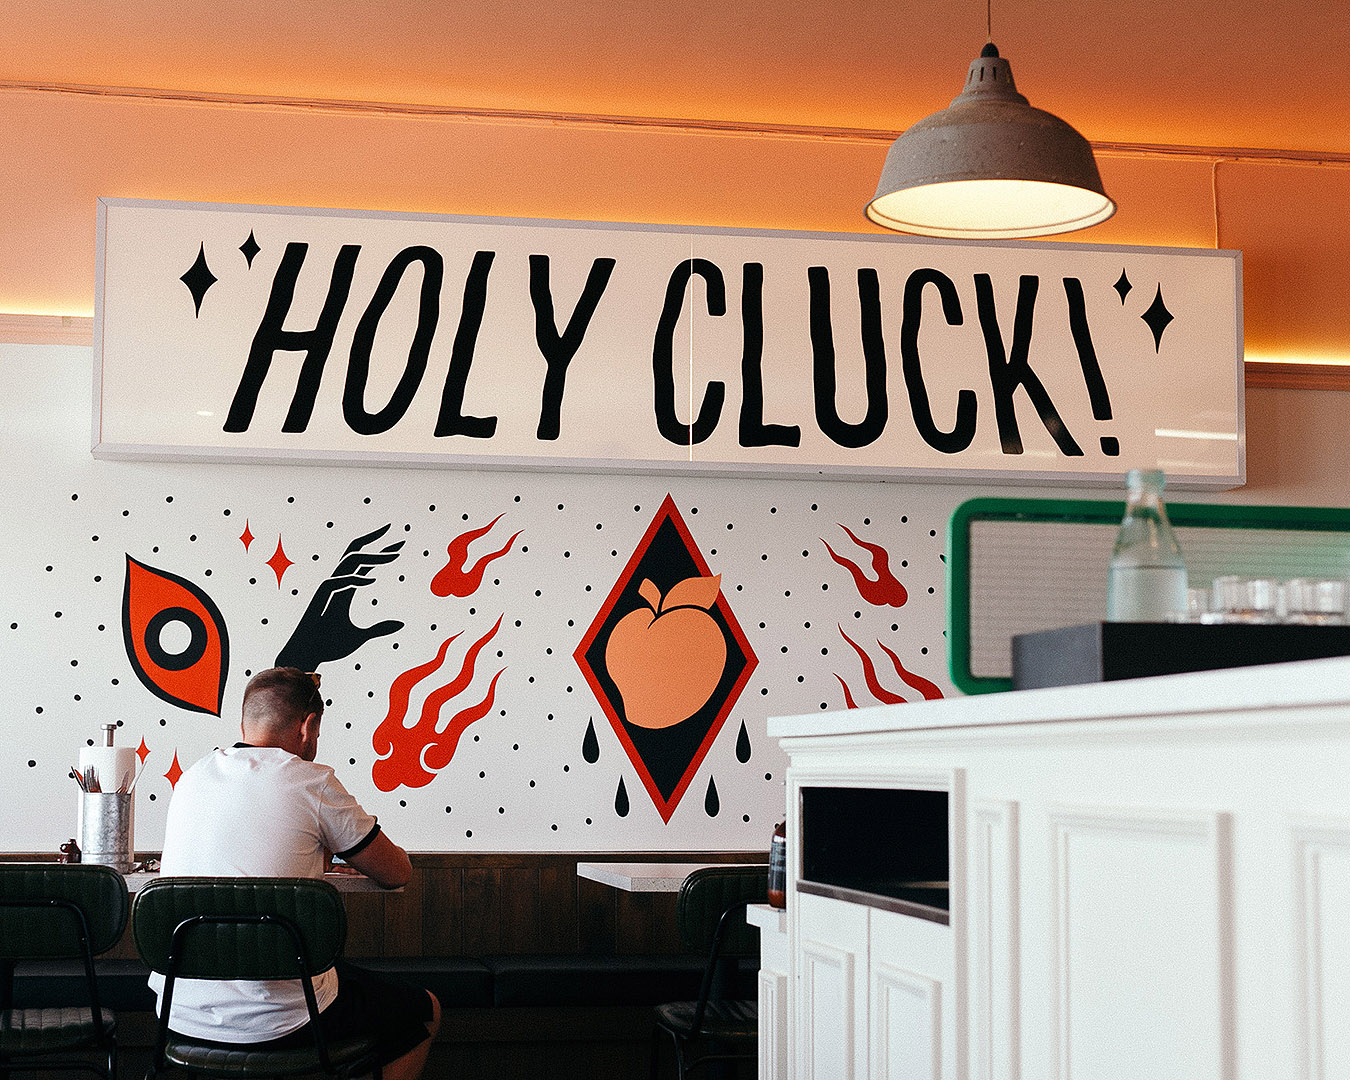 We’re looking at the wall of a restaurant at ‘HOLY CLUCK’ in large lettering above an artwork with single eyes, a peach in a black triangle, fire and black arms. 